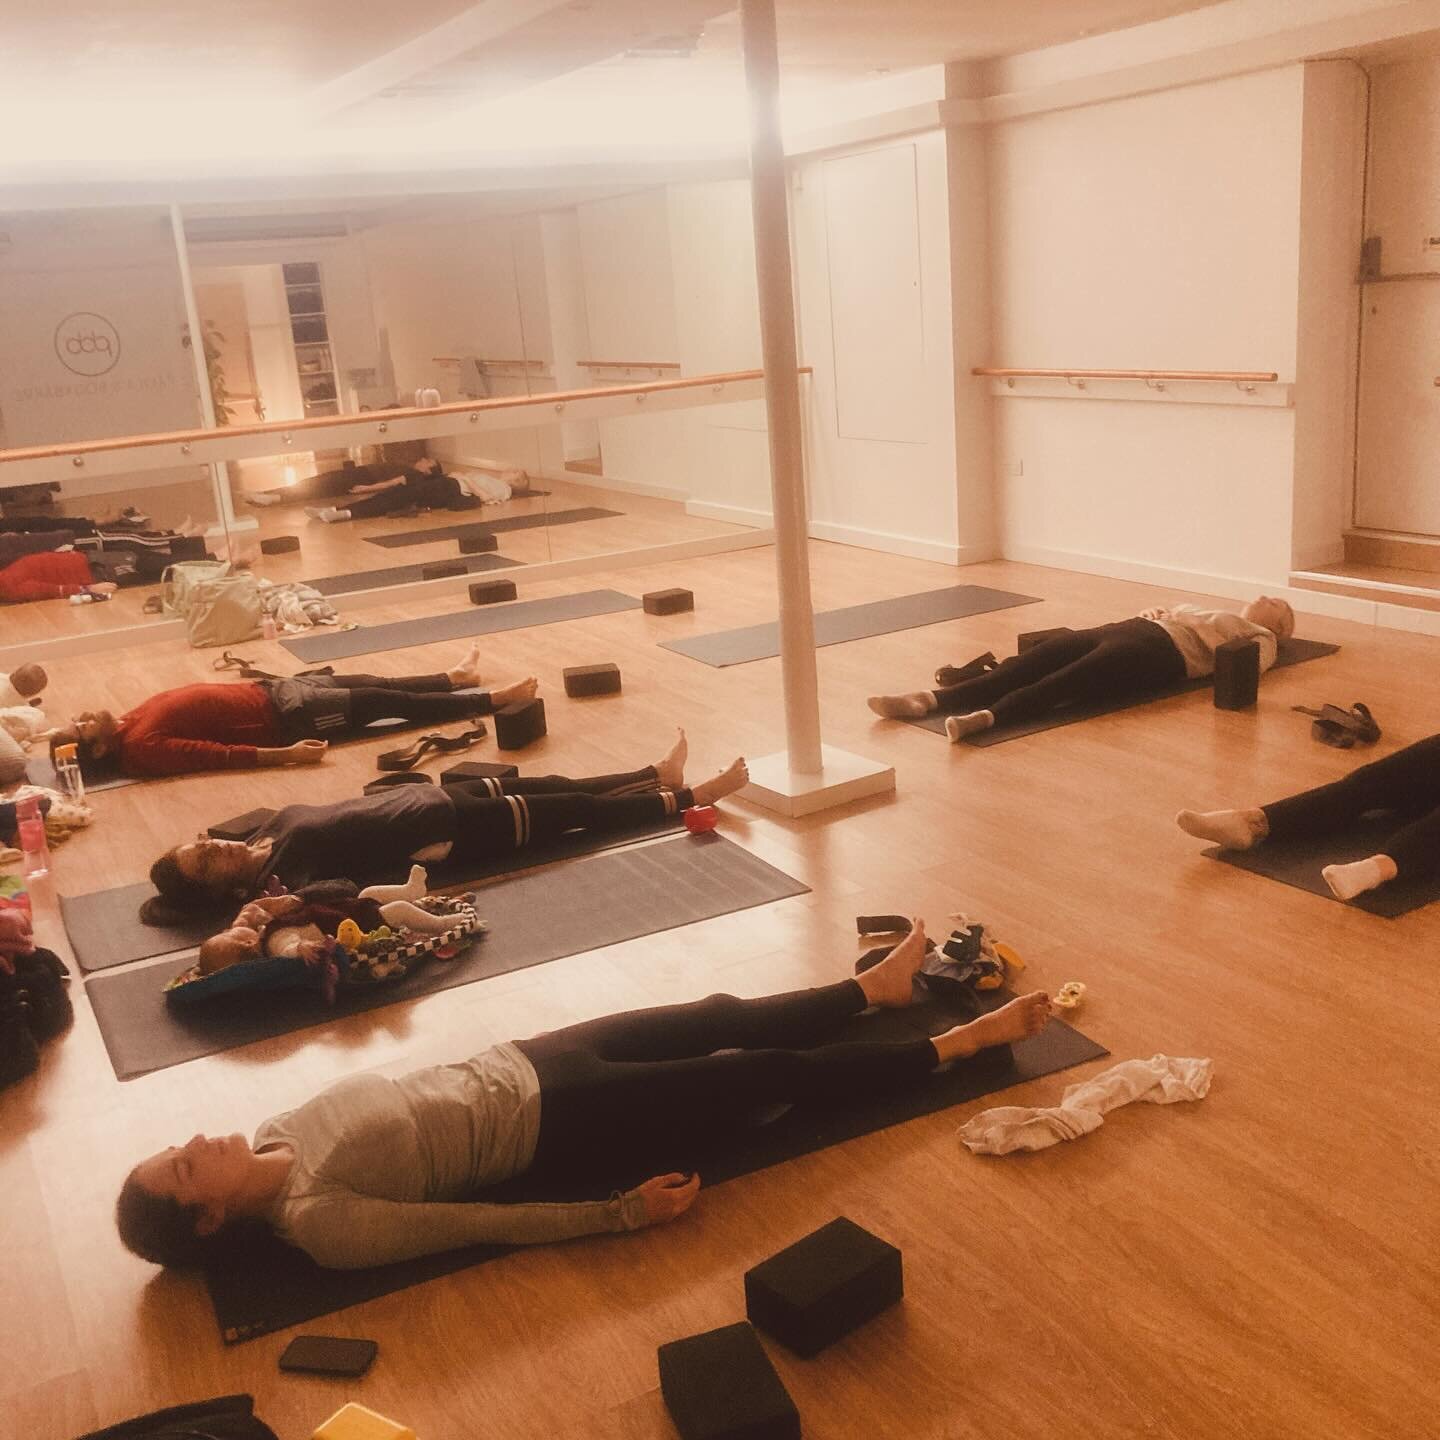 A moment of calm to wind up the joyful chaos that is #postnatalyoga! Join us next Tuesday for the final class before half-term break ❤️ but don't worry, we'll be back! For bookings, DM or follow link in bio

#postnatalfitness #postnatalwellbeing #pos